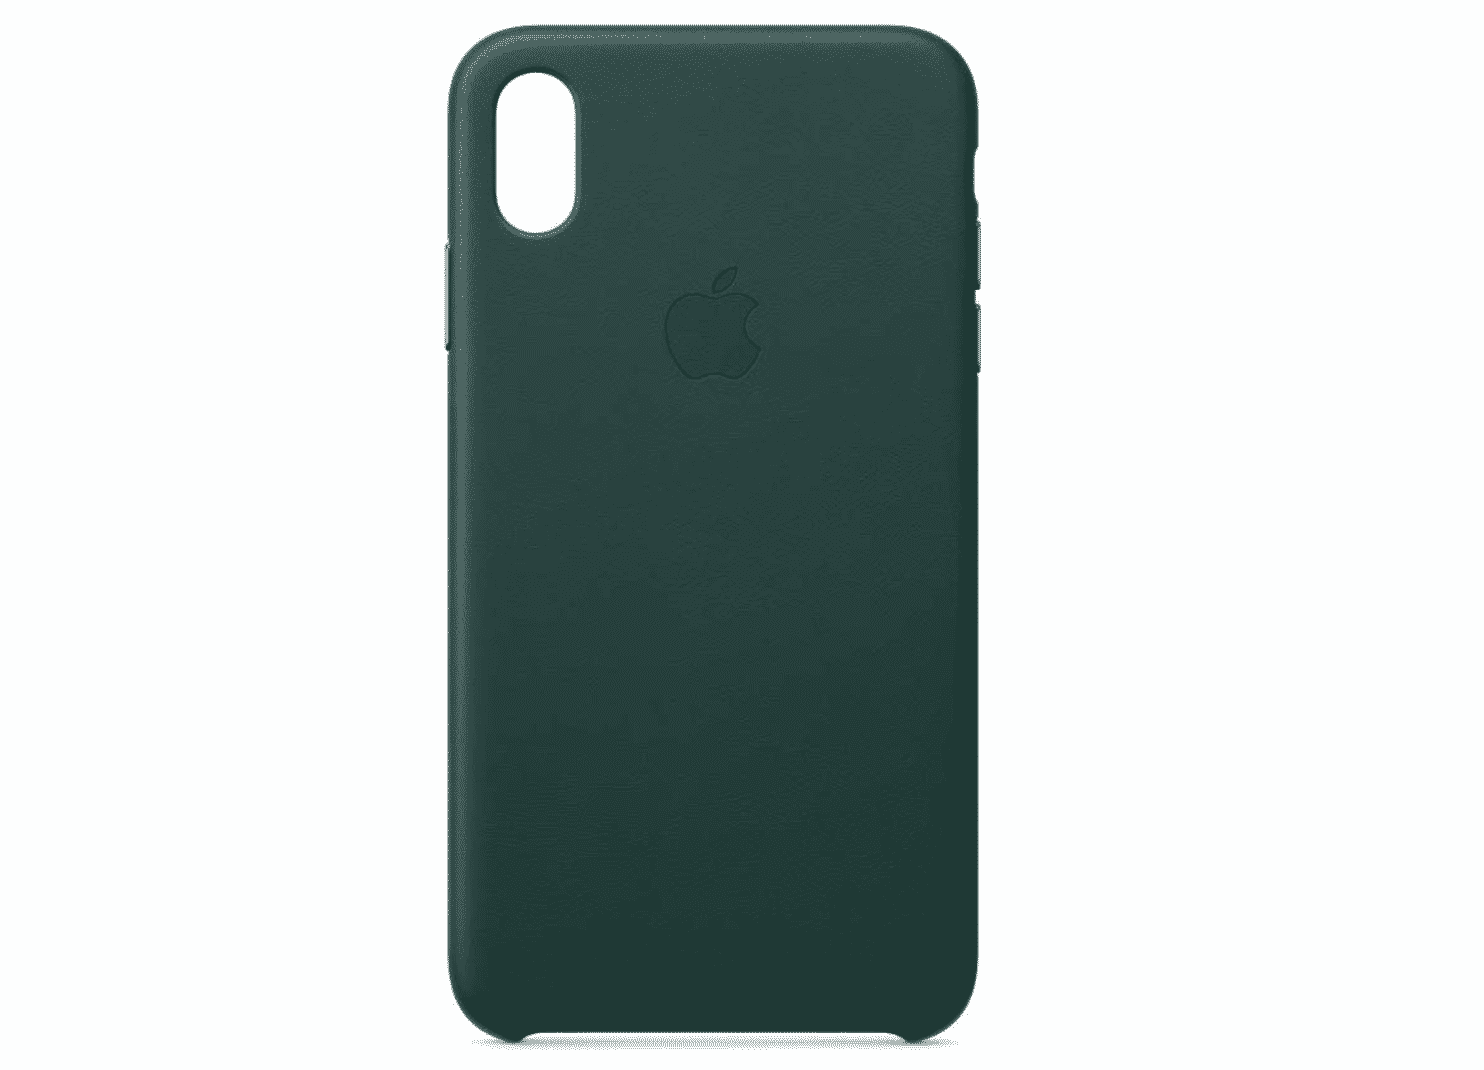 iPhone XS Max Leather Case Drops to Only $30